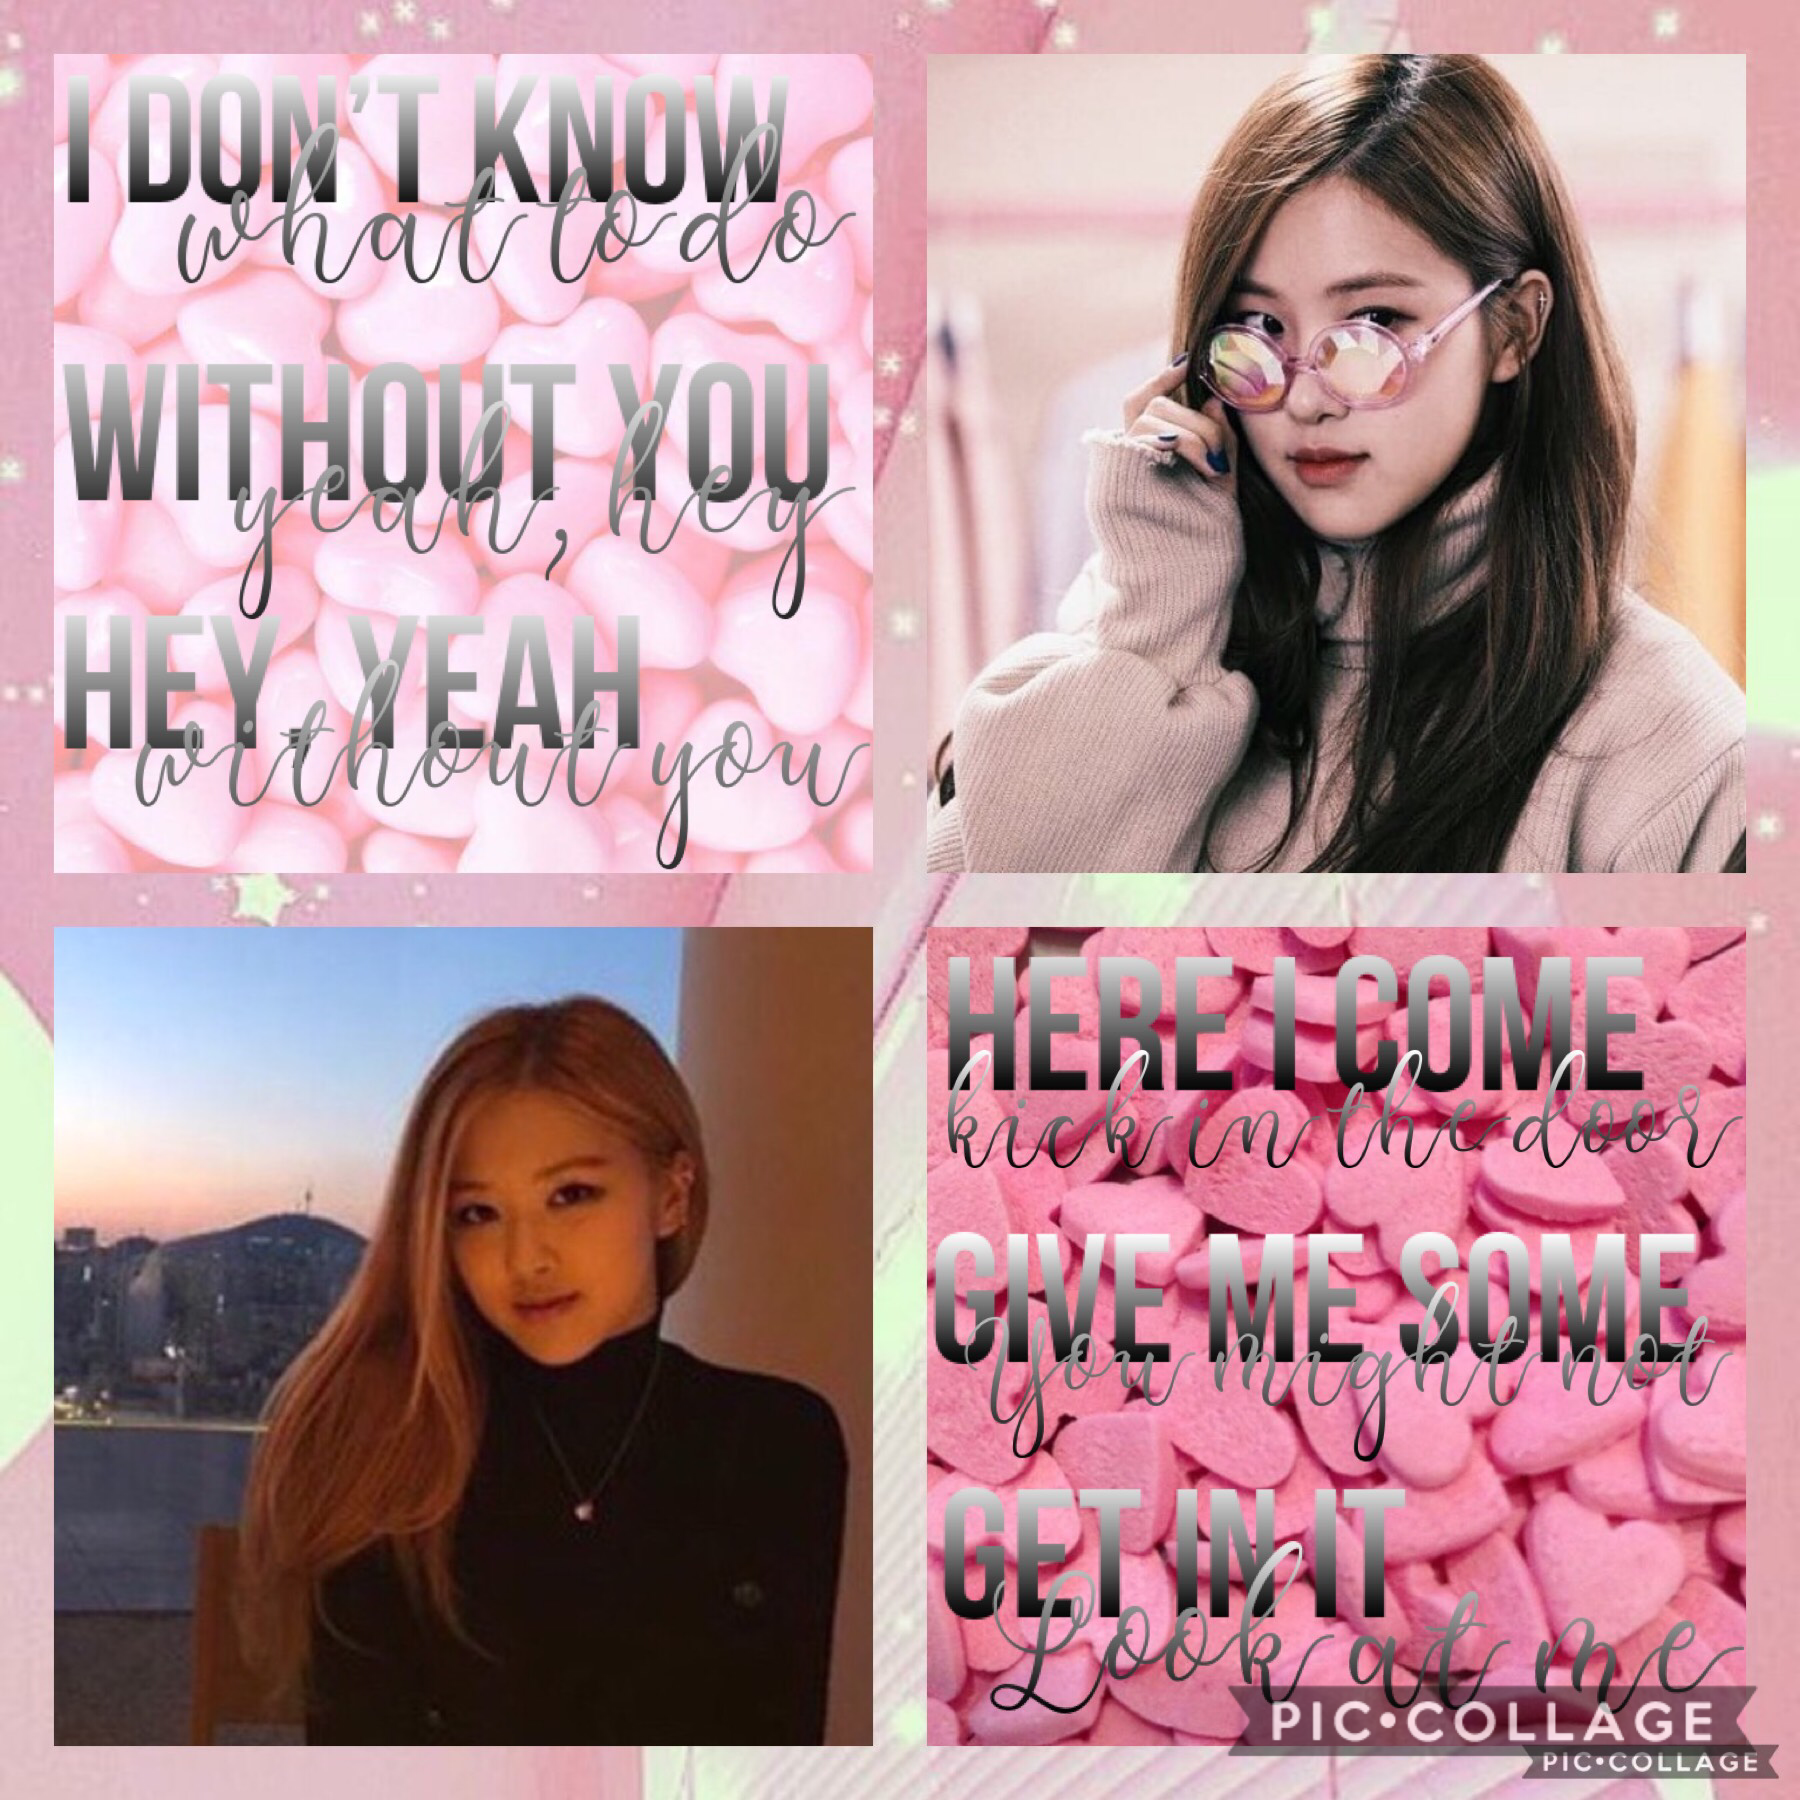 HEY IM BACK ok sorry for caps abuse but like yea, try to guess the two different songs by blackpink